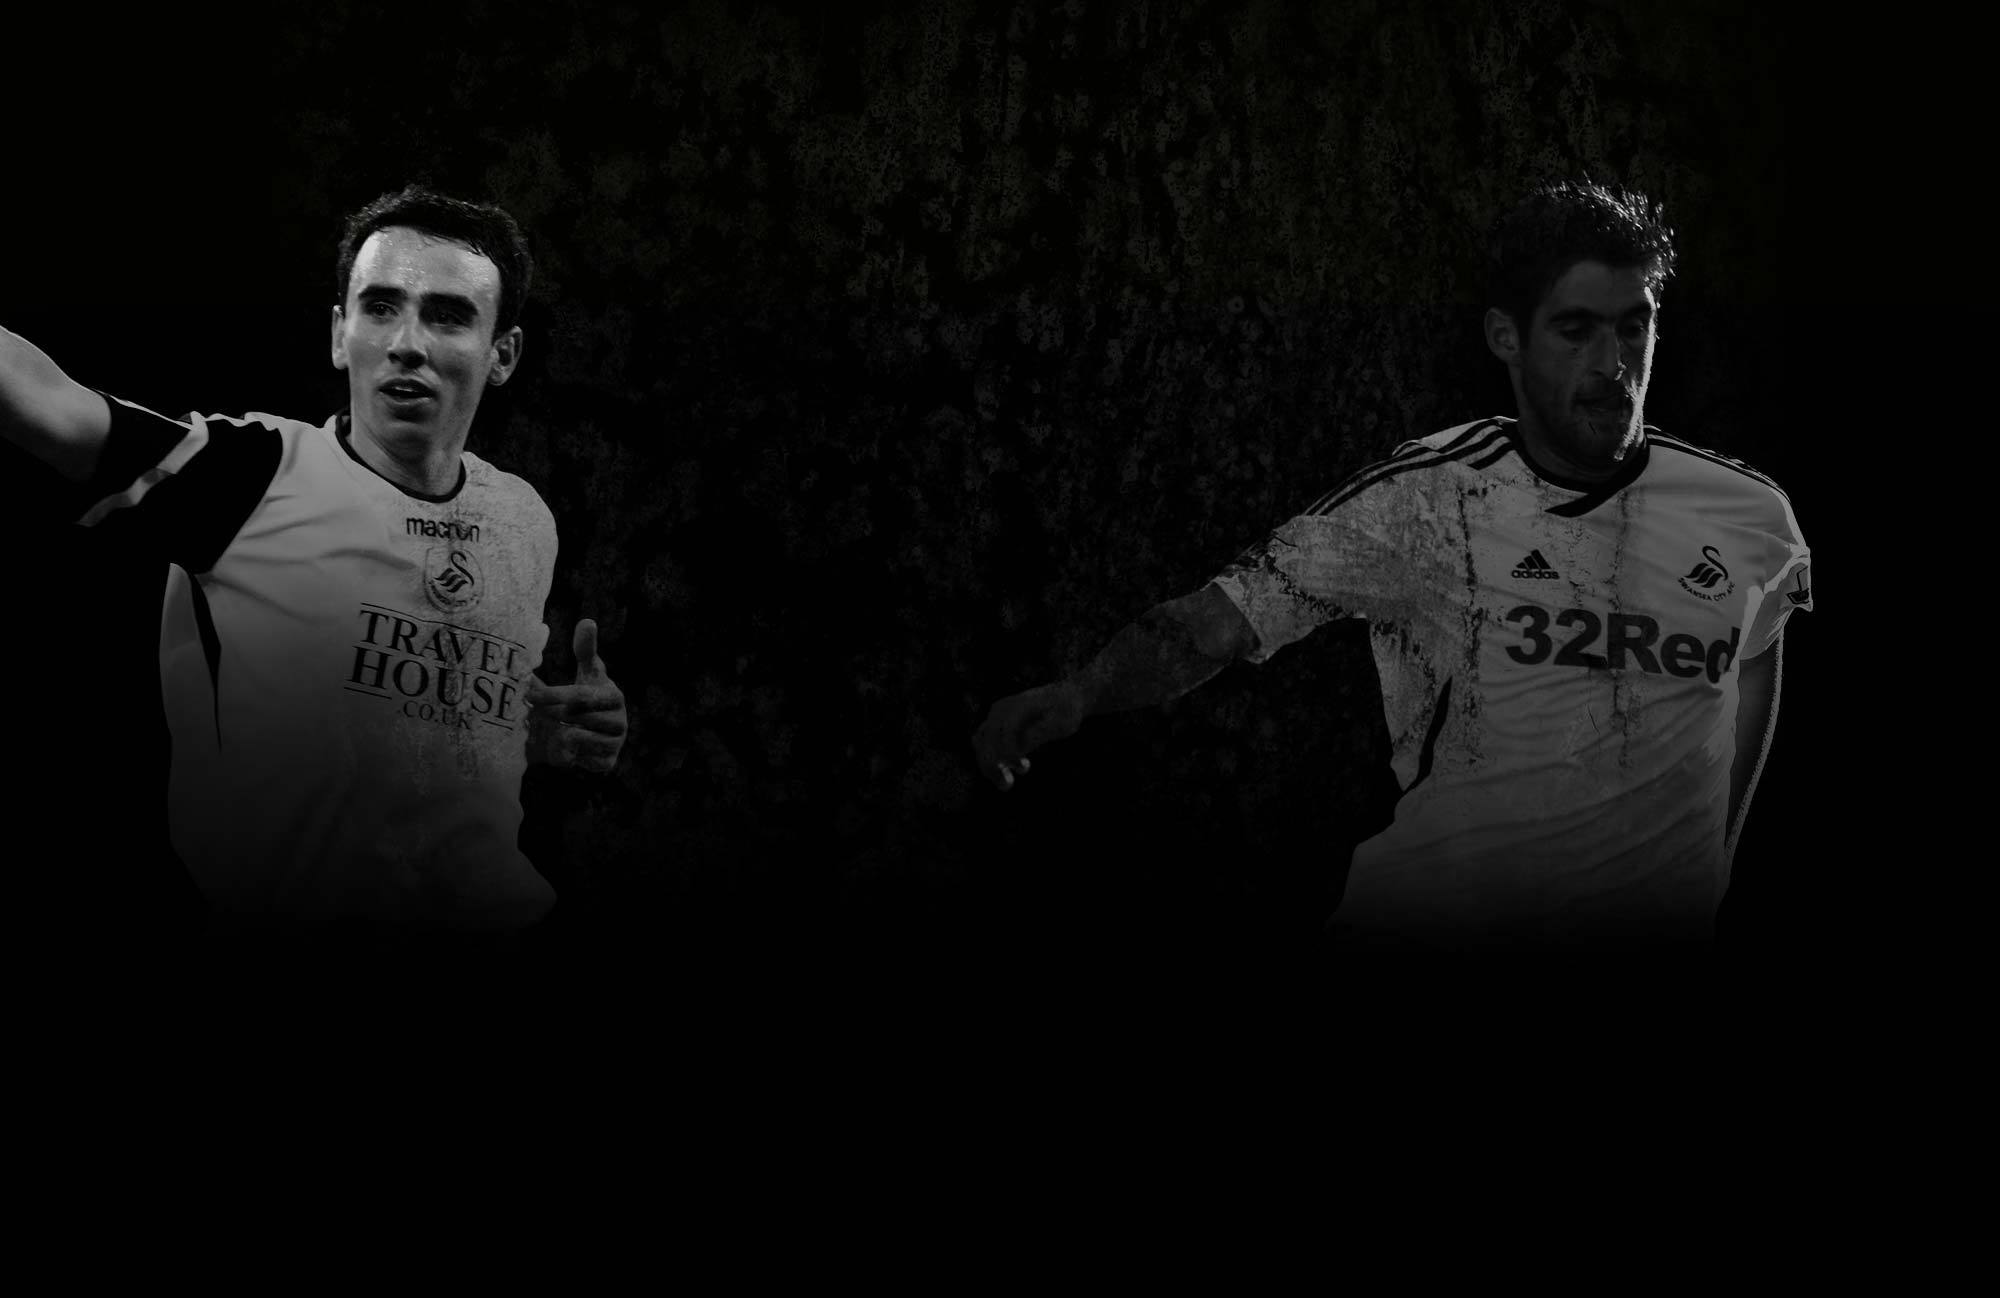 Best Football club of england Swansea City wallpapers and images ...